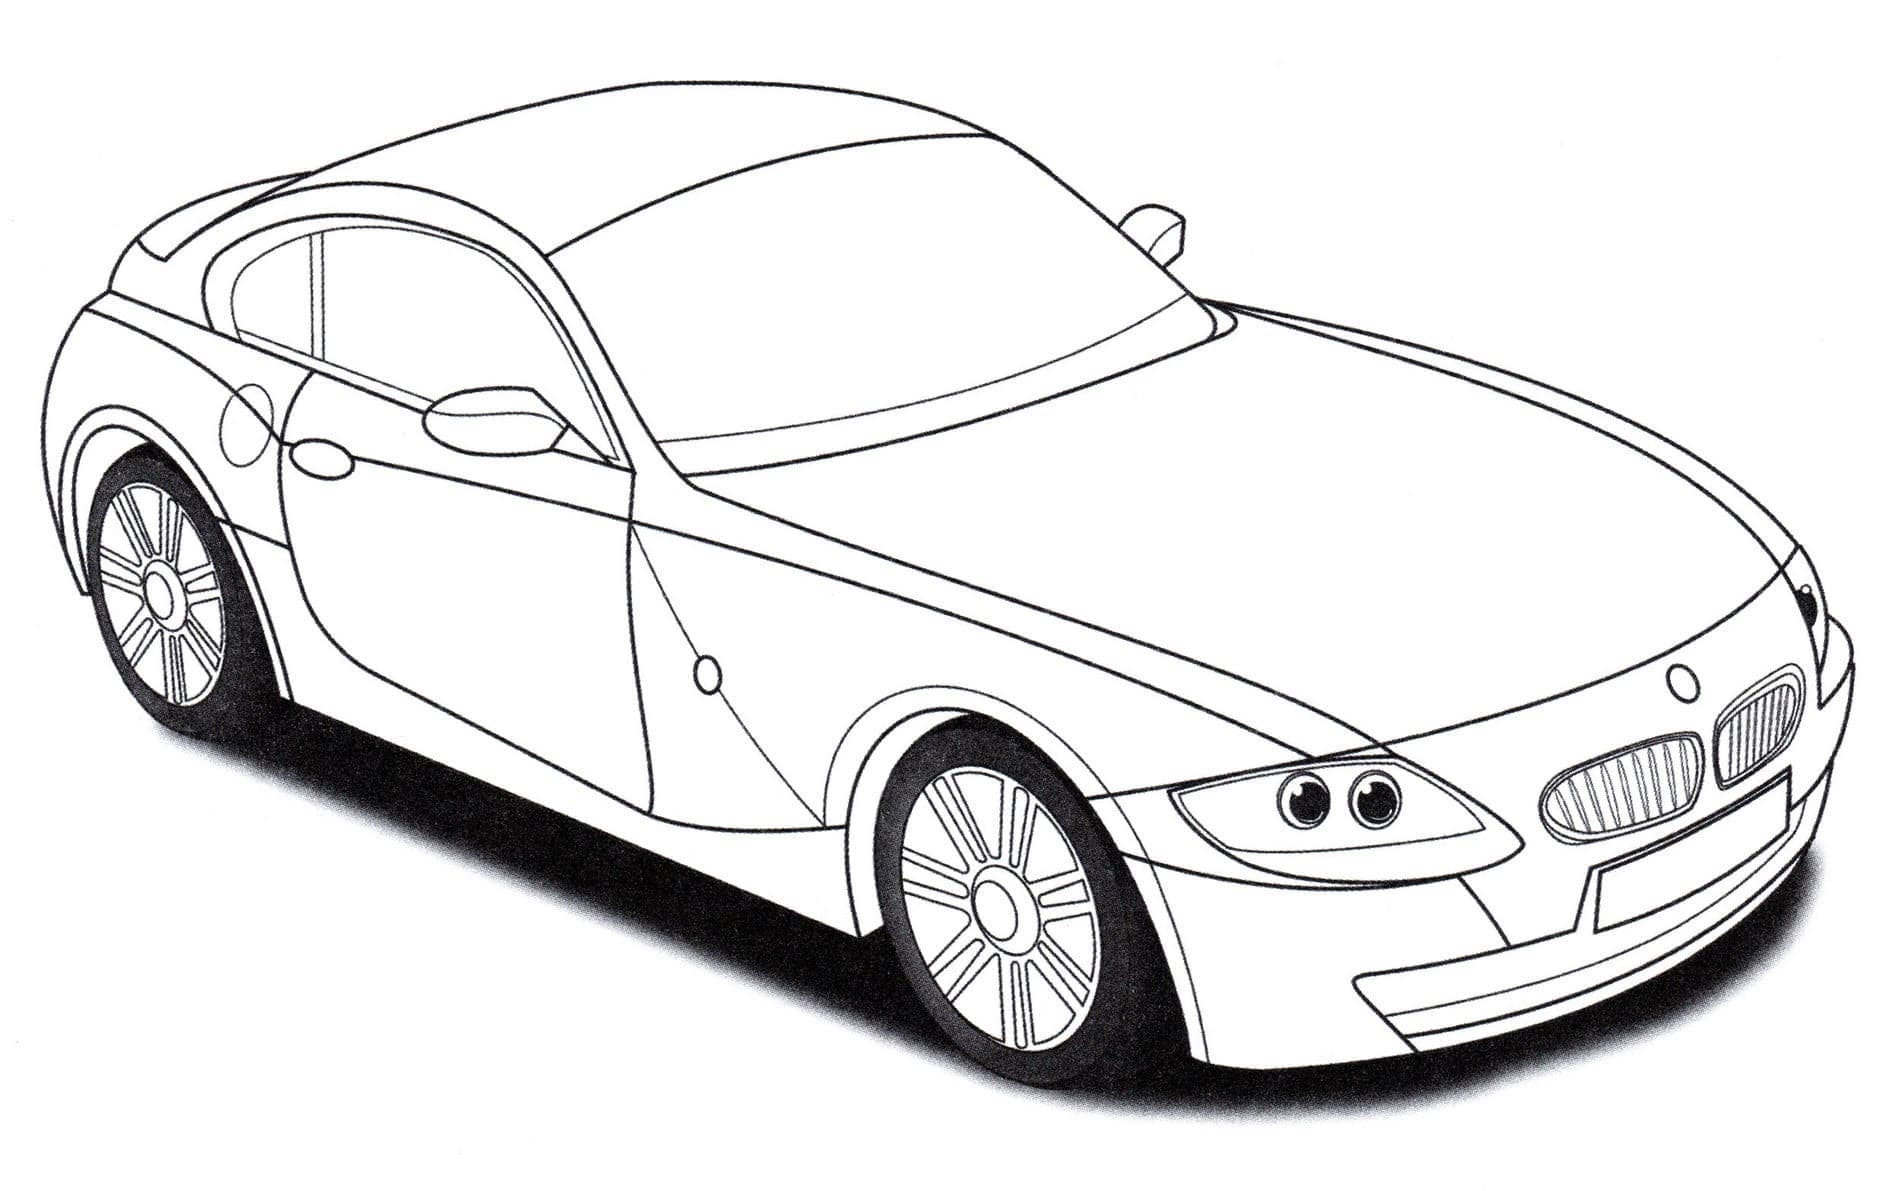 Voiture BMW Z4 M coloring page